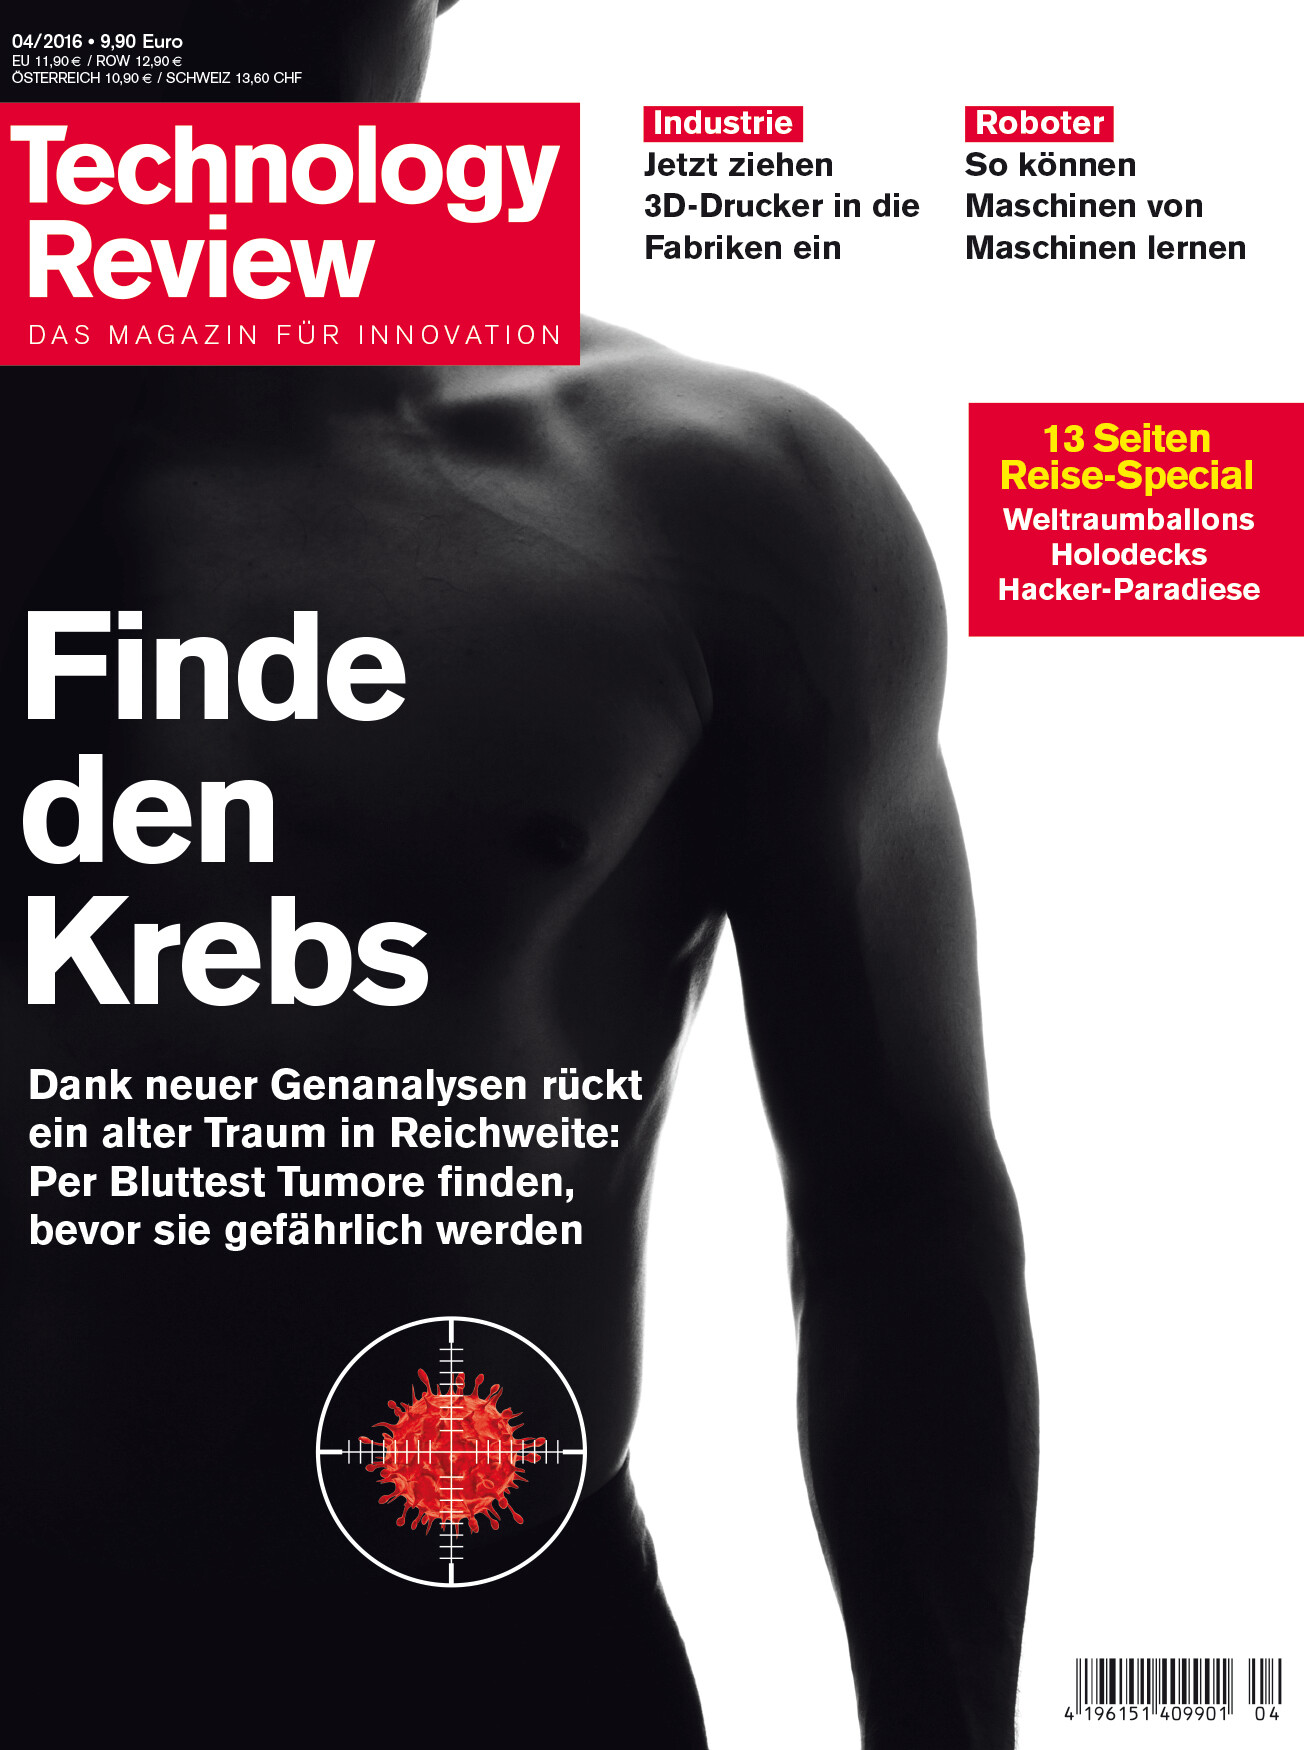 Technology Review 04/2016